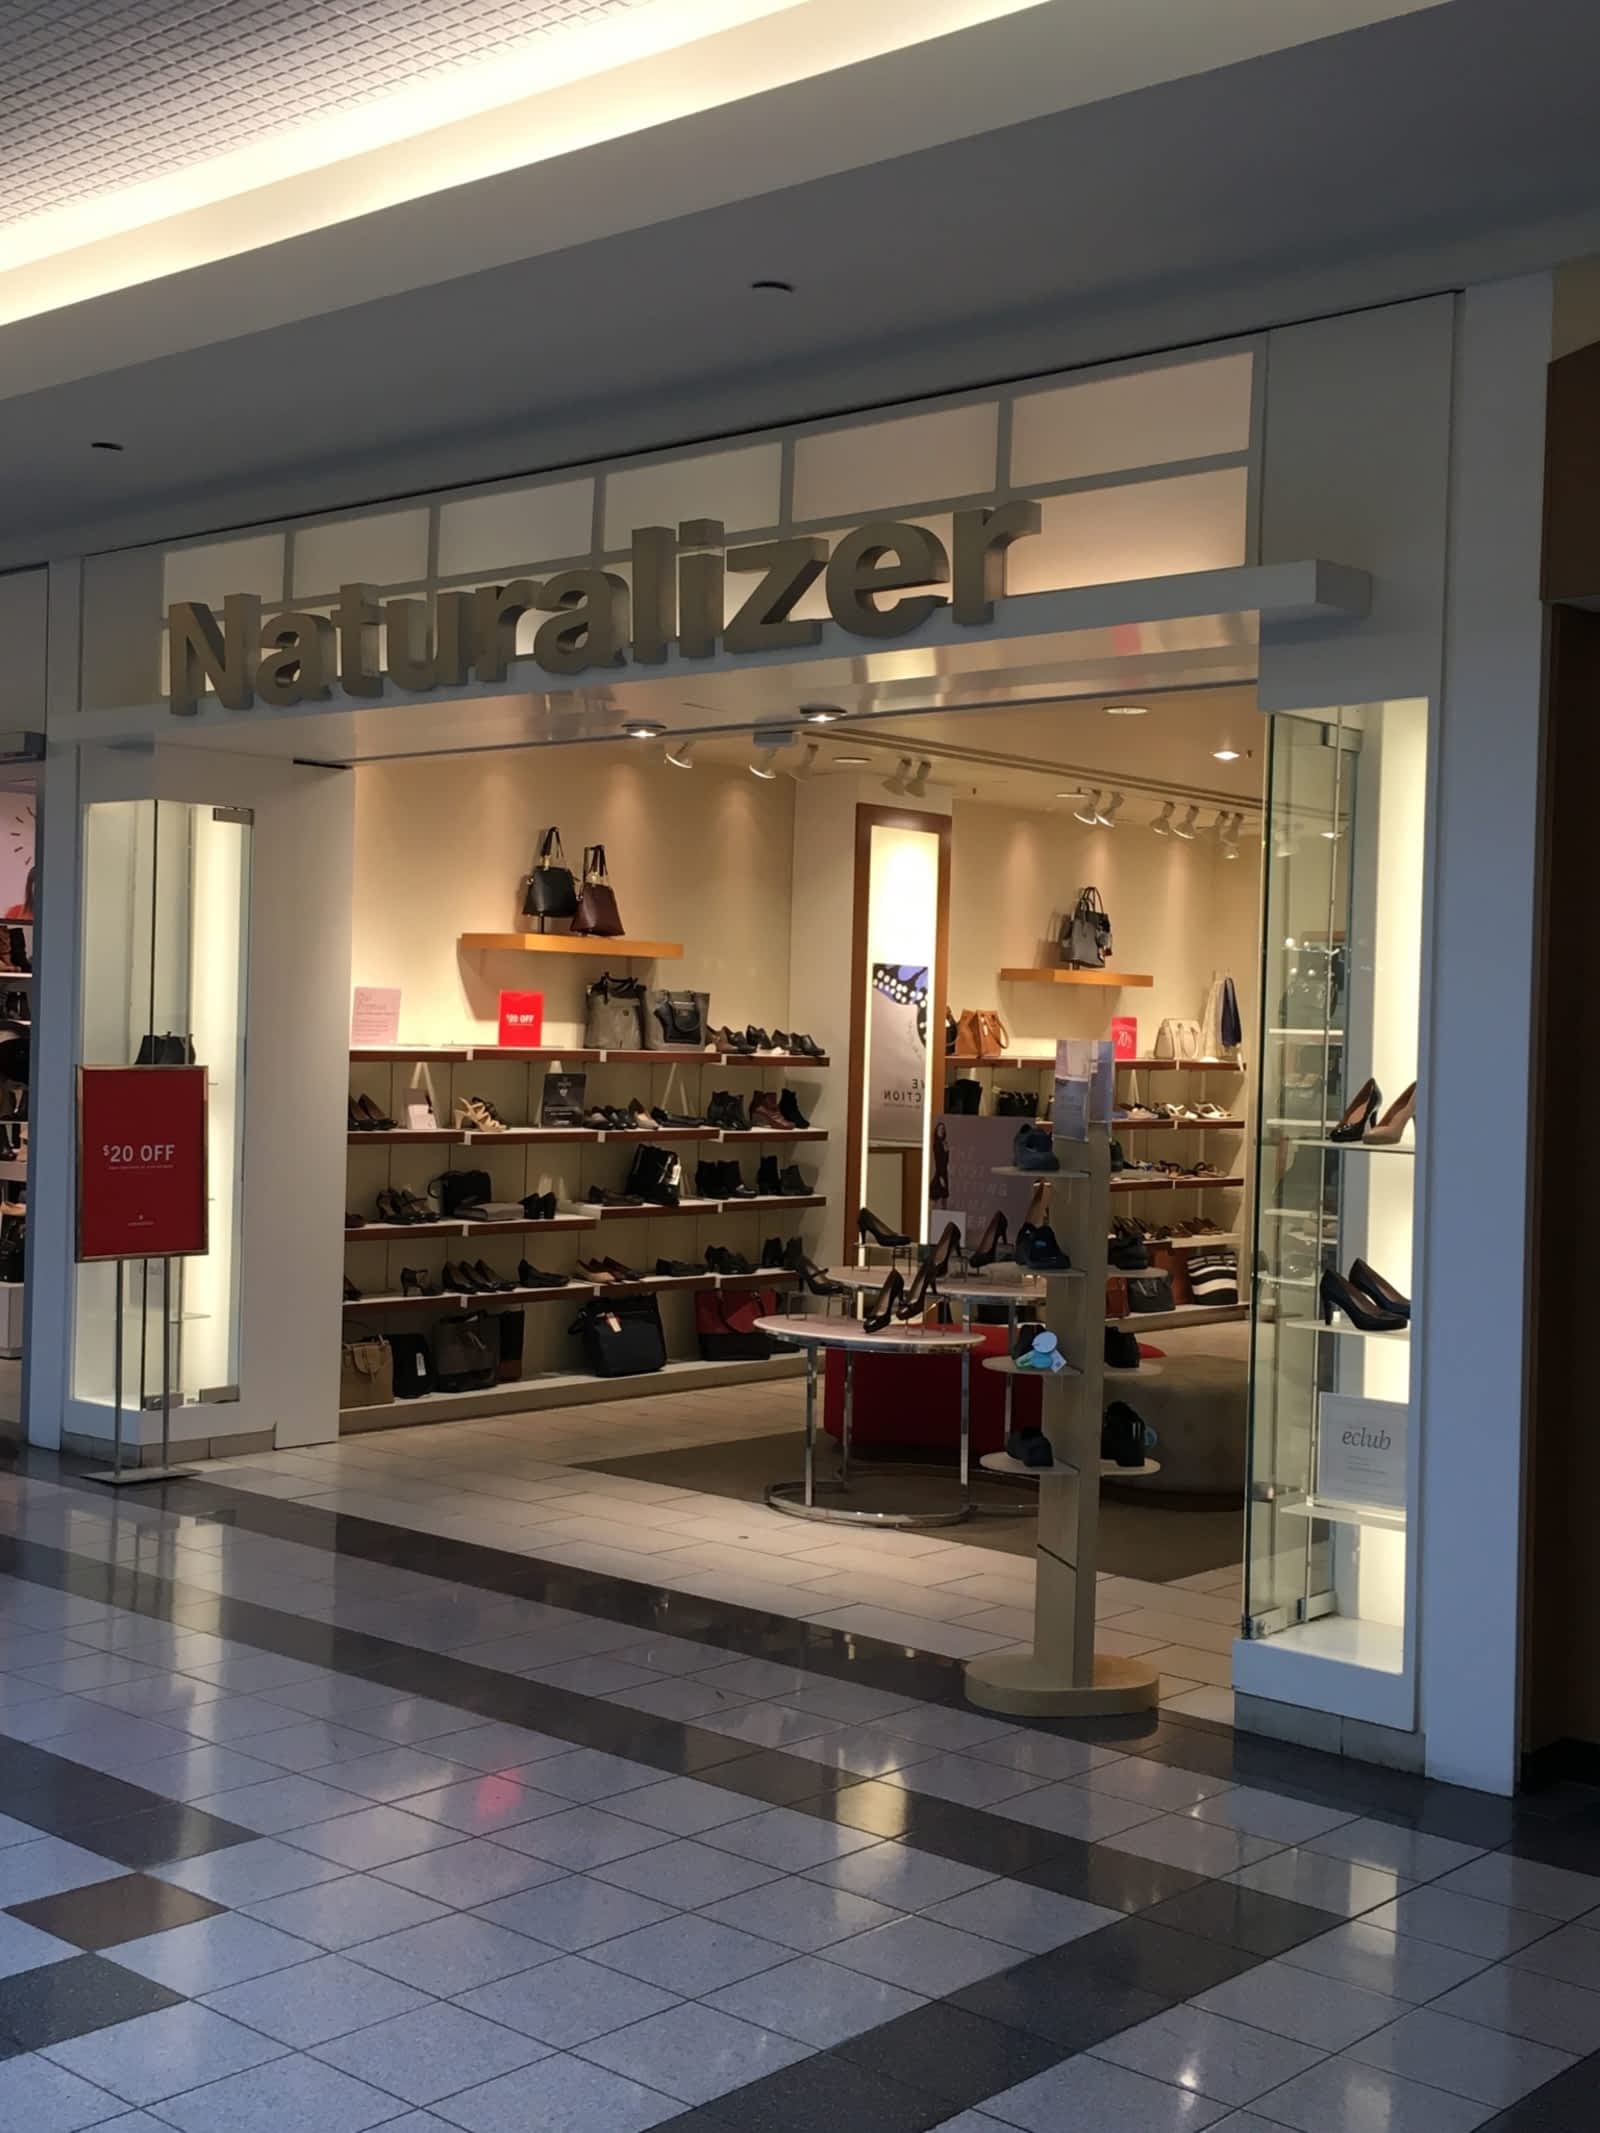 the naturalizer shoe store